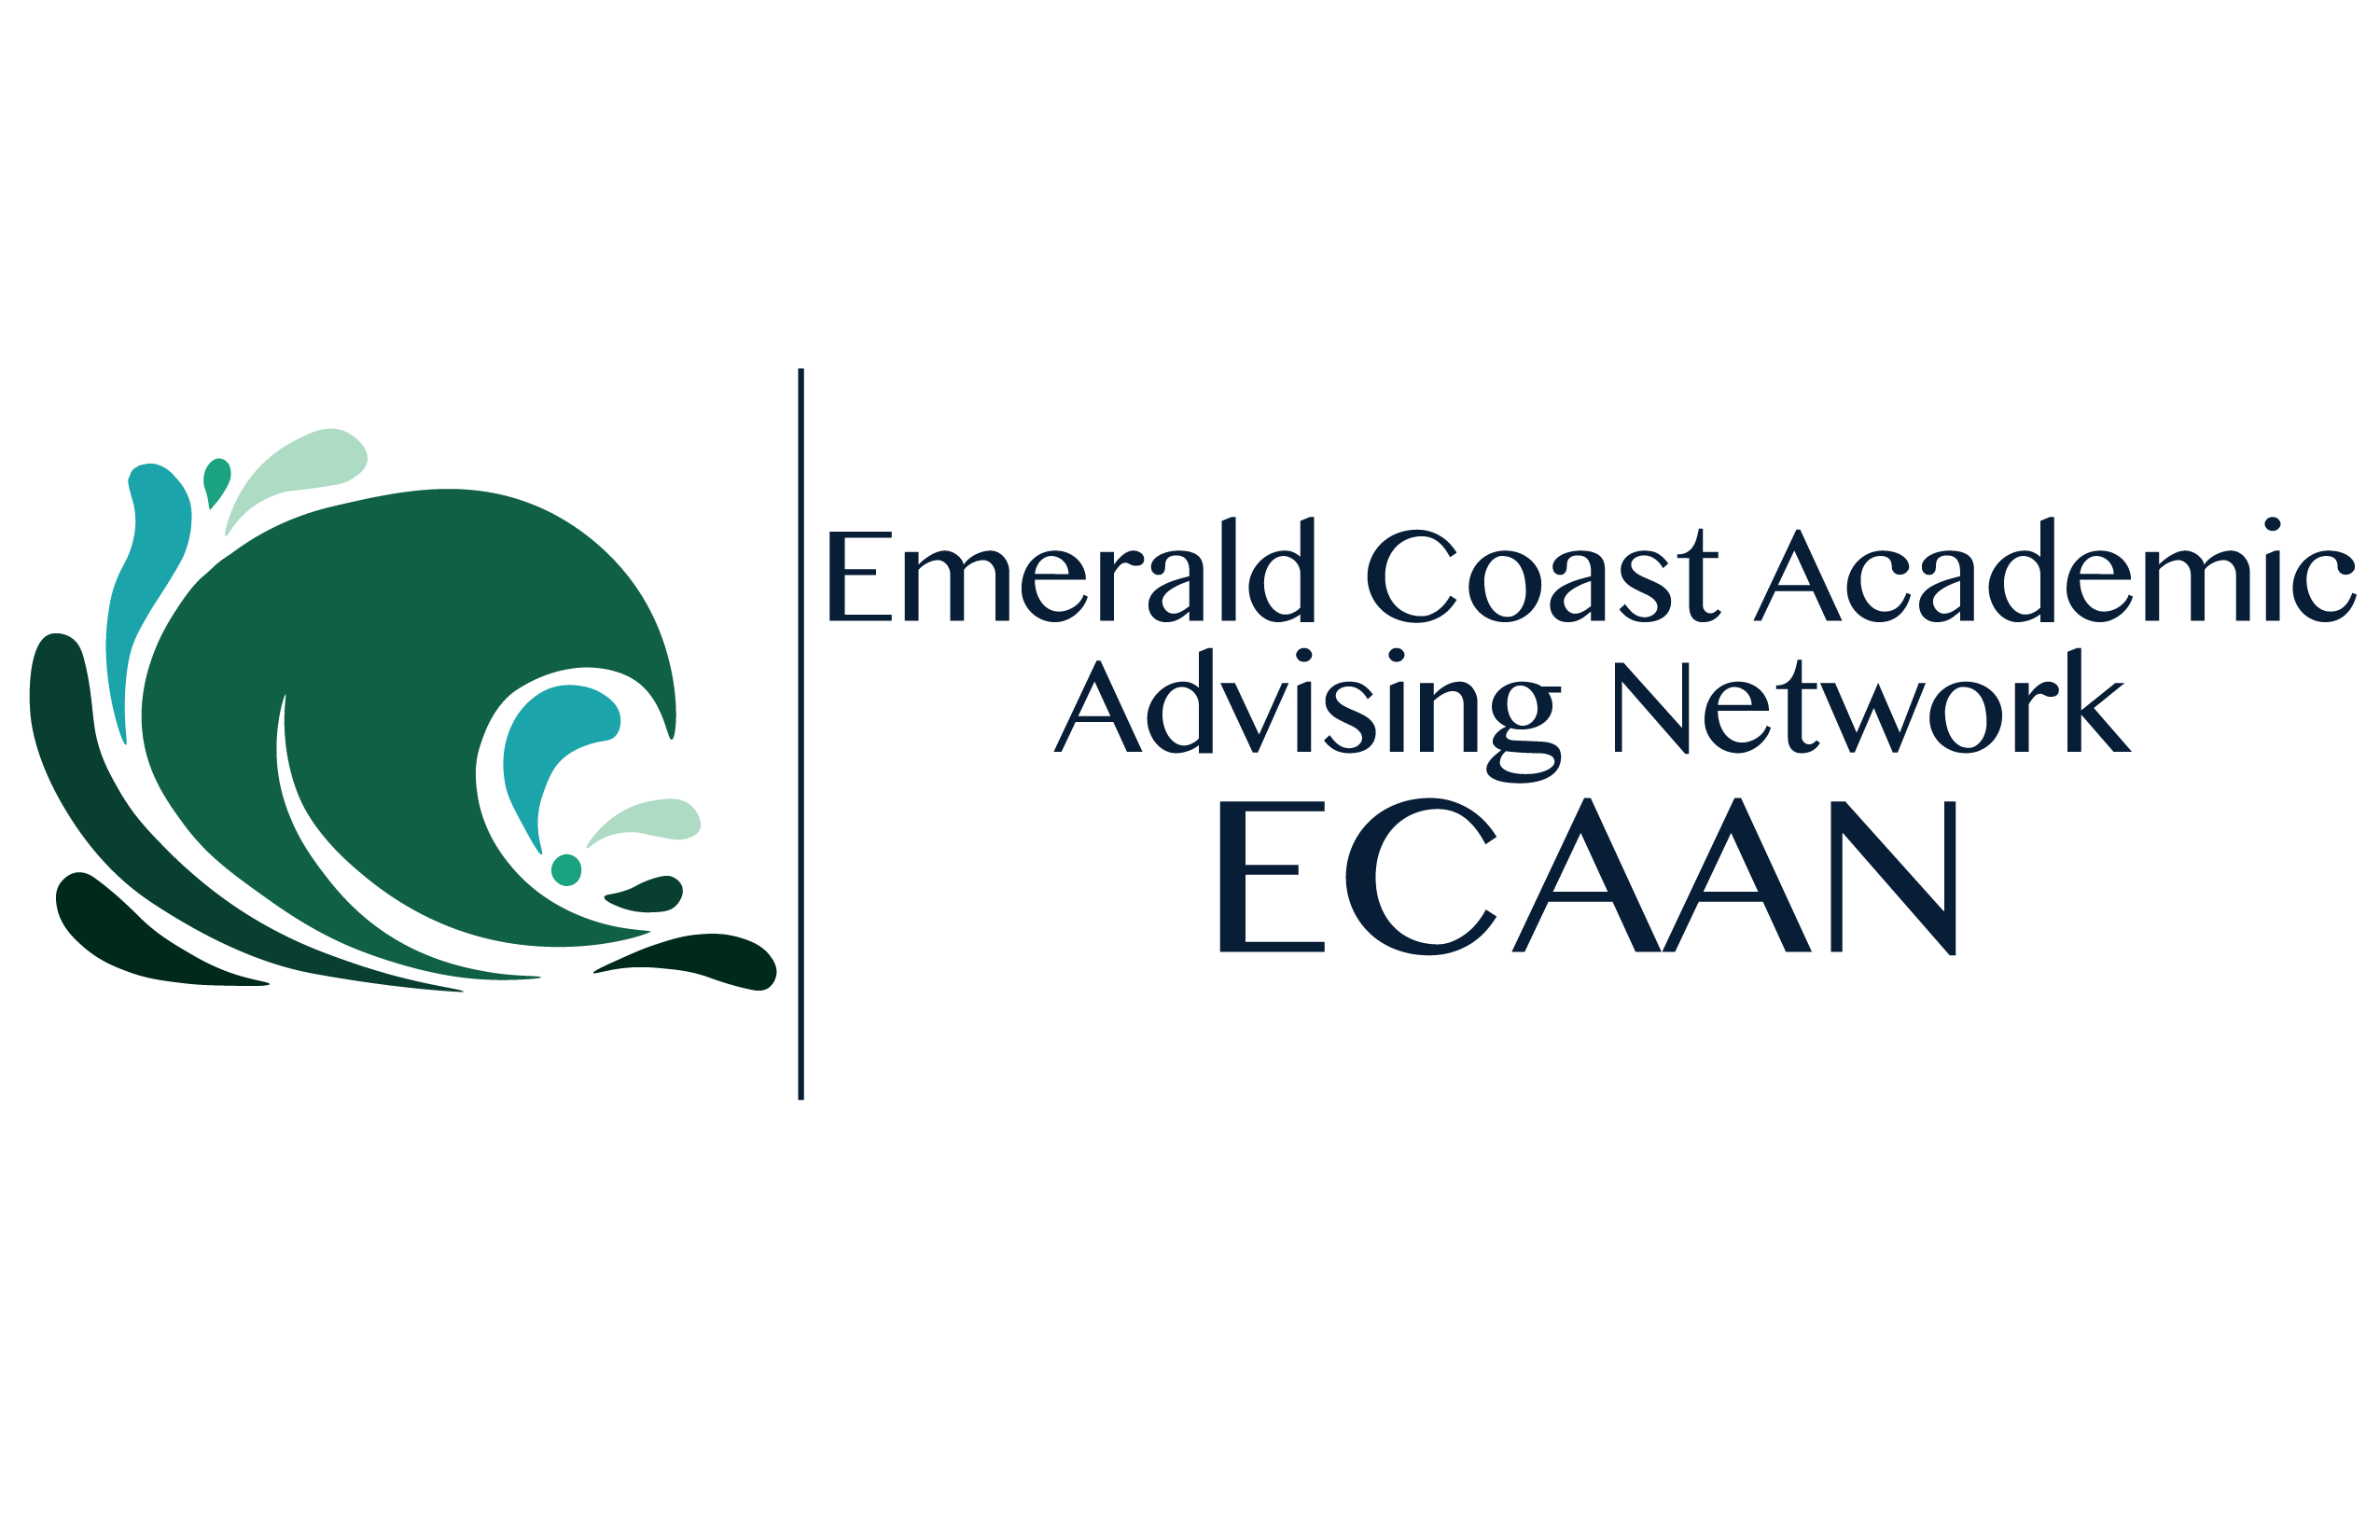 Organization logo which is a multicolored wave and the words Emerald Coast Academic Advising Network ECAAN